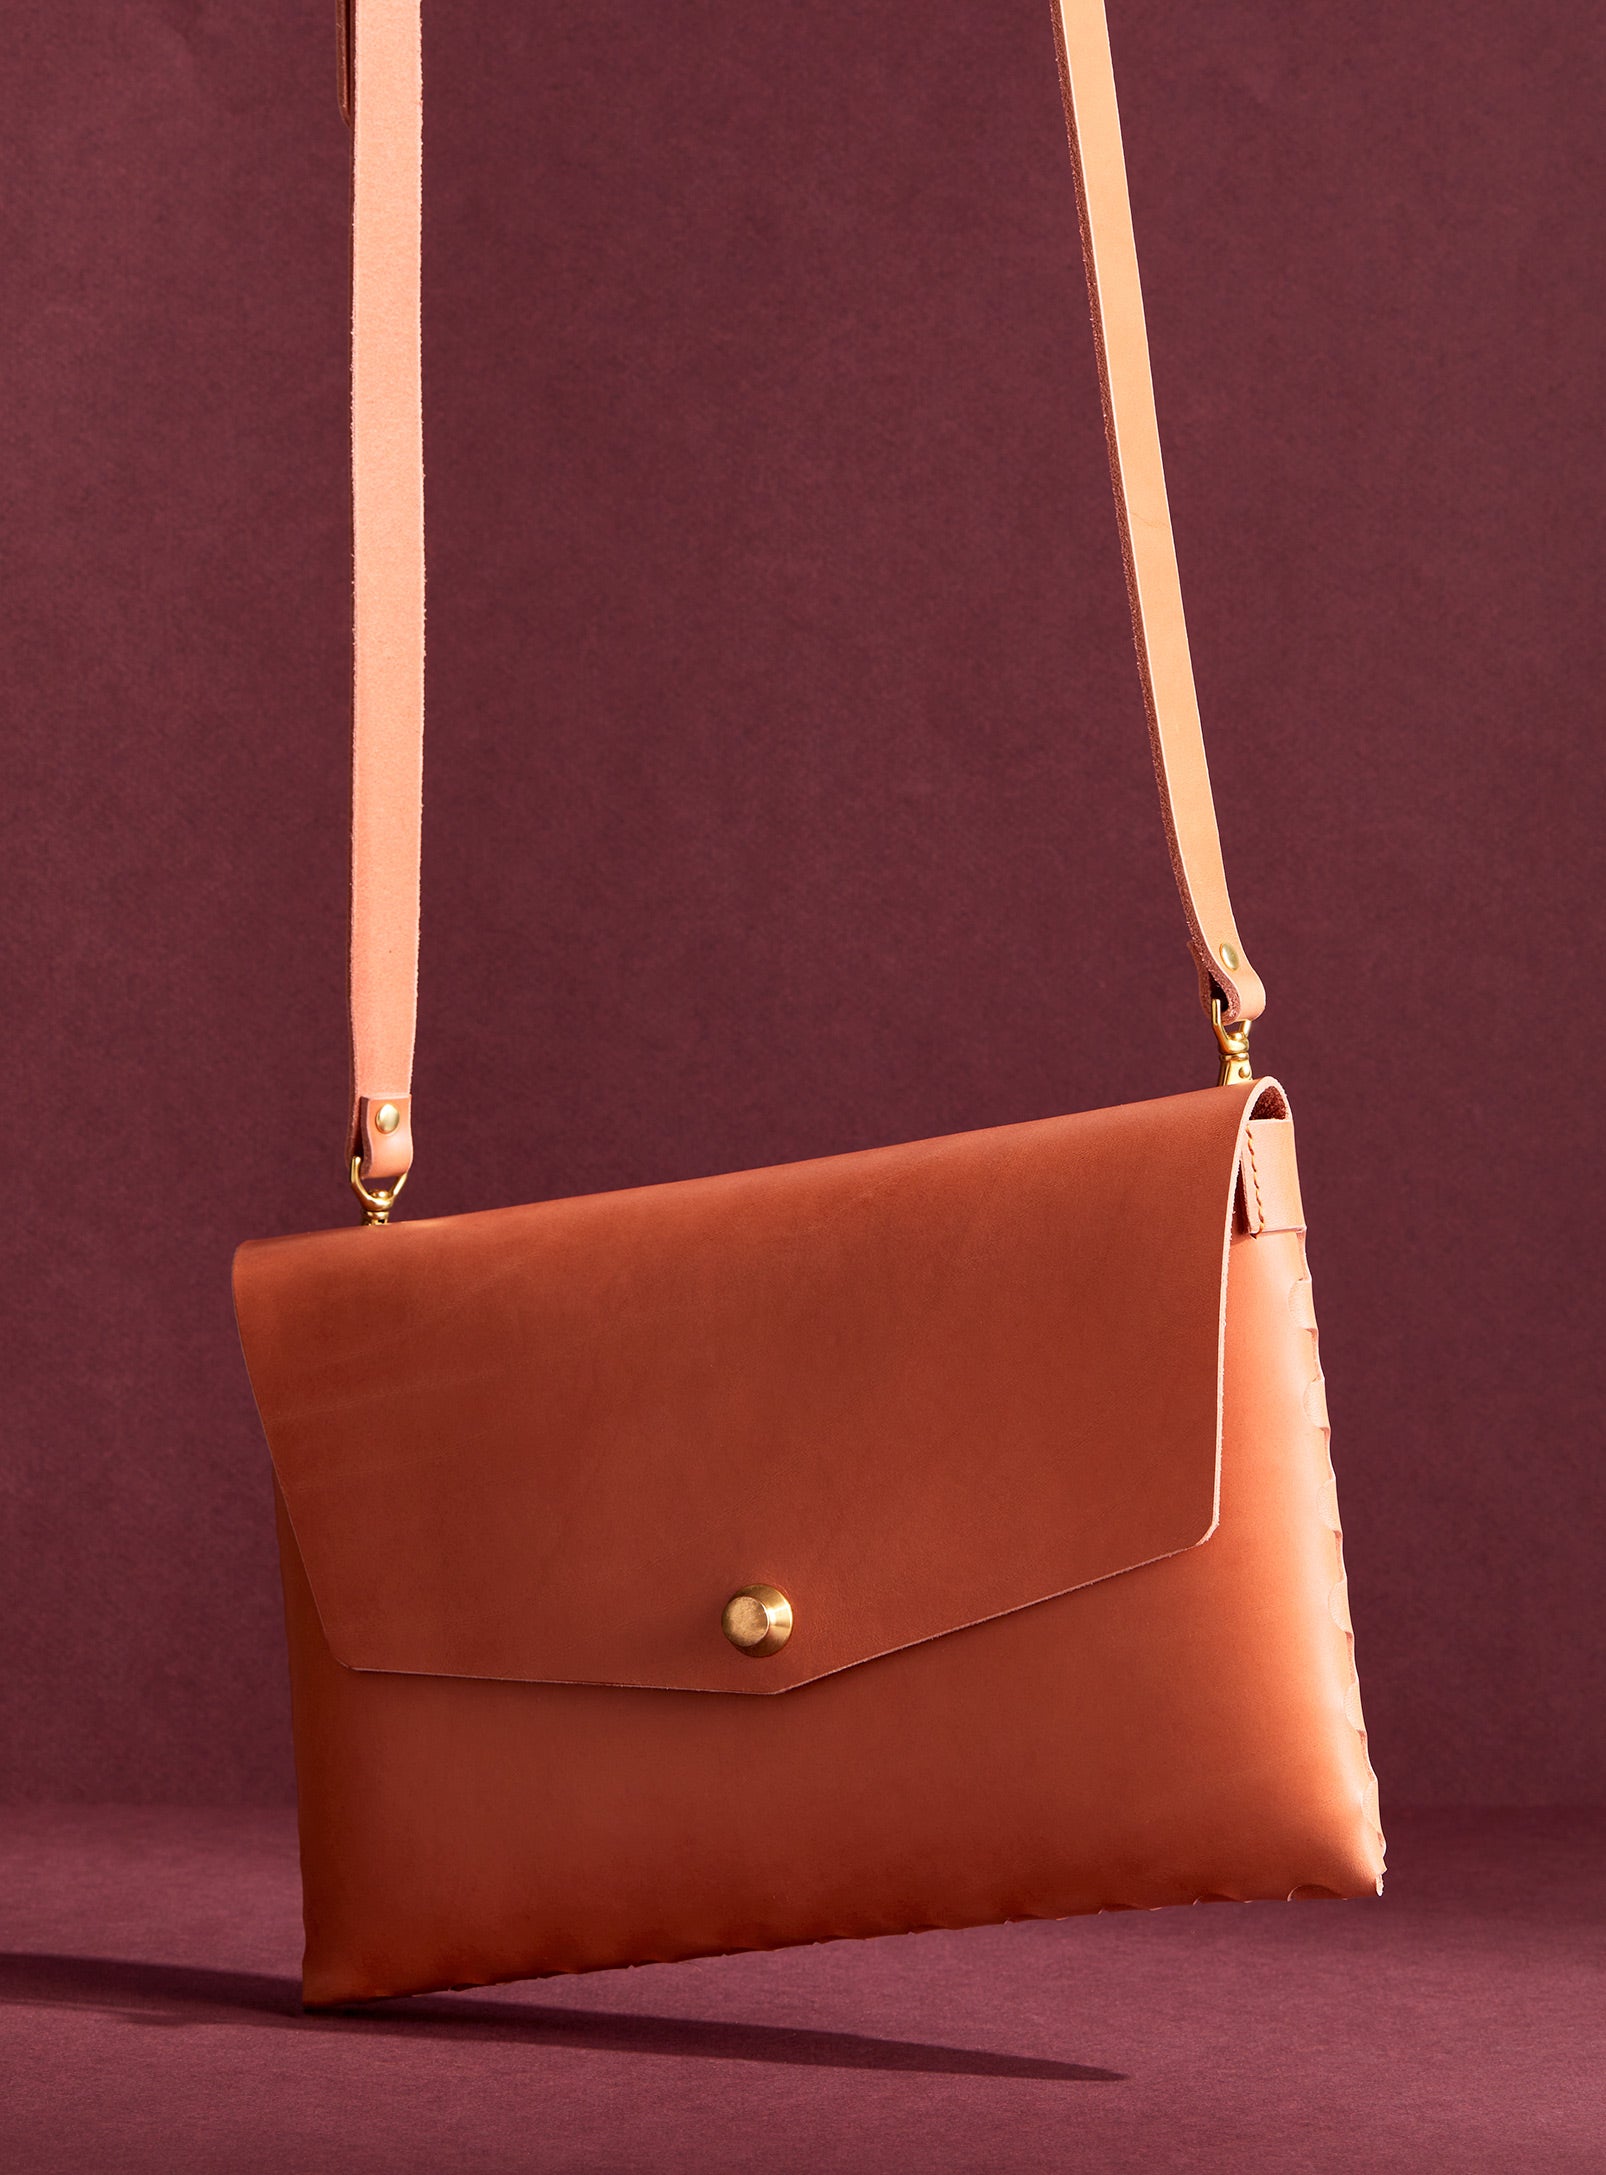 modjūl’s leather mini bag deluxe bag in pink. A larger take on the classic mini bag, a rectangular-shaped bag with long detachable straps, handcrafted in Canada using quality Italian leather and brass hardware.